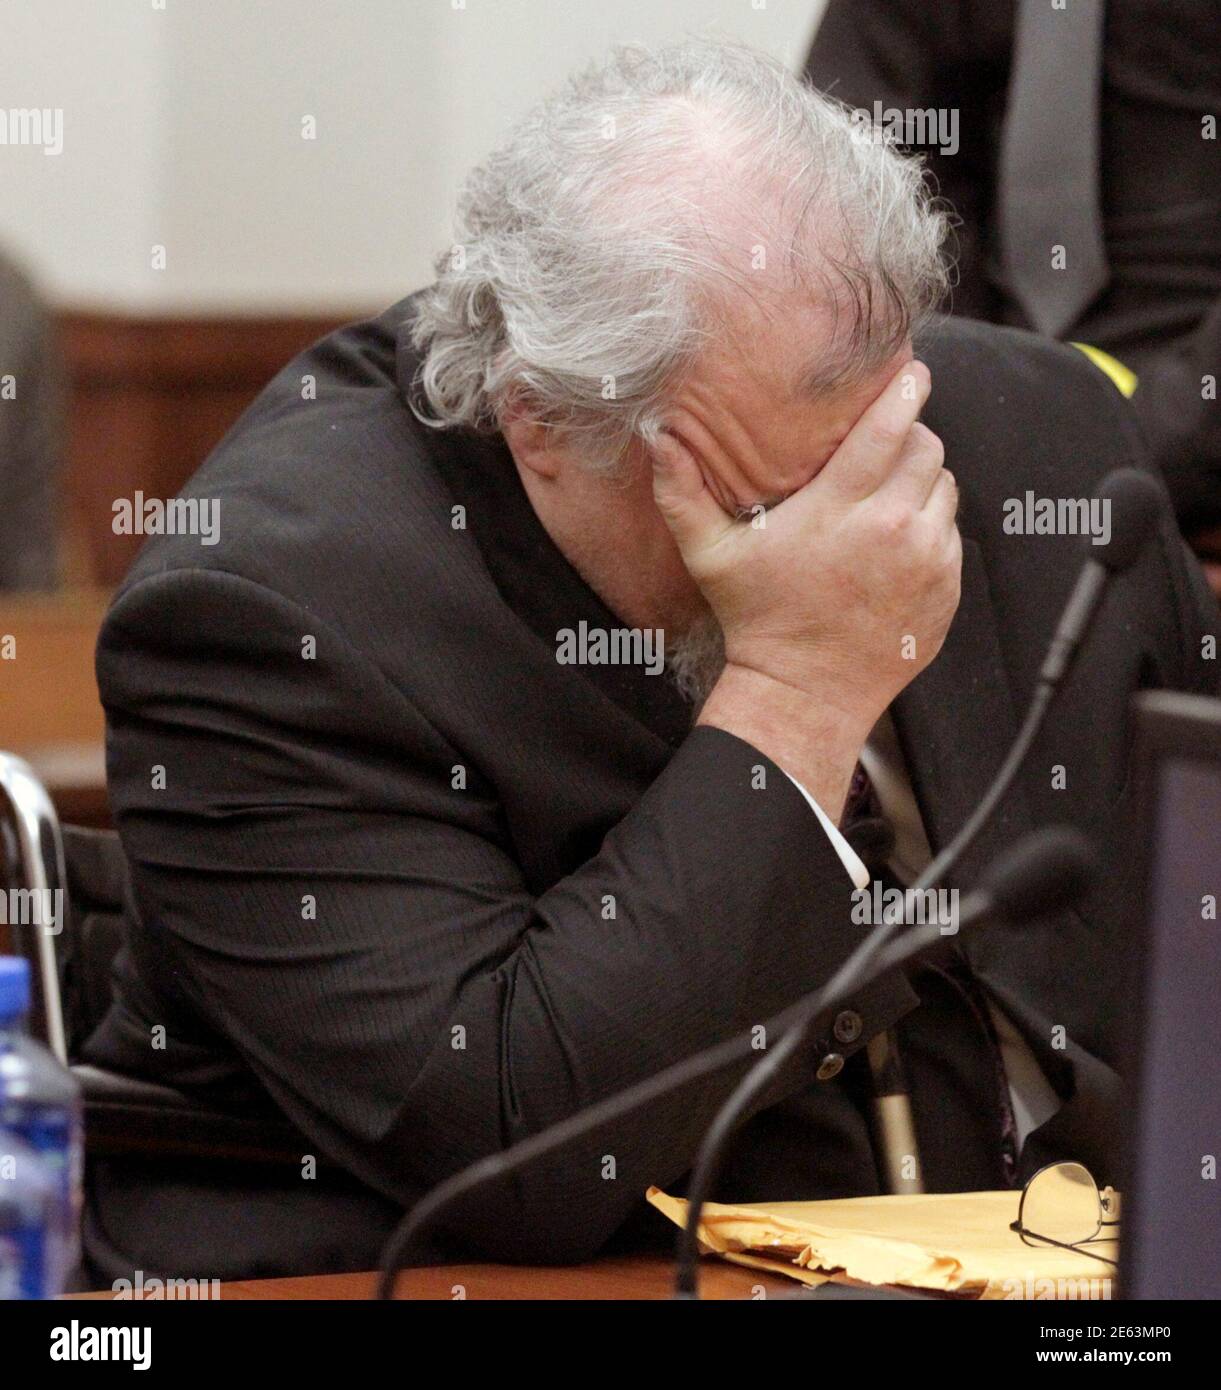 Accused Craigslist killer Richard Beasley reacts while jury verdict forms are checked after being found guilty in Summit County Court of Common Pleas courtroom in Akron, Ohio March 12, 2013. An Ohio jury found Beasley guilty of murder on Tuesday for his role in a 2011 scheme that lured down-on-their-luck men to their deaths with an ad for a non-existent job on Craigslist. REUTERS/Mike Masturzo/Akron Beacon Journal/Pool  (UNITED STATES - Tags: CRIME LAW) Stock Photo